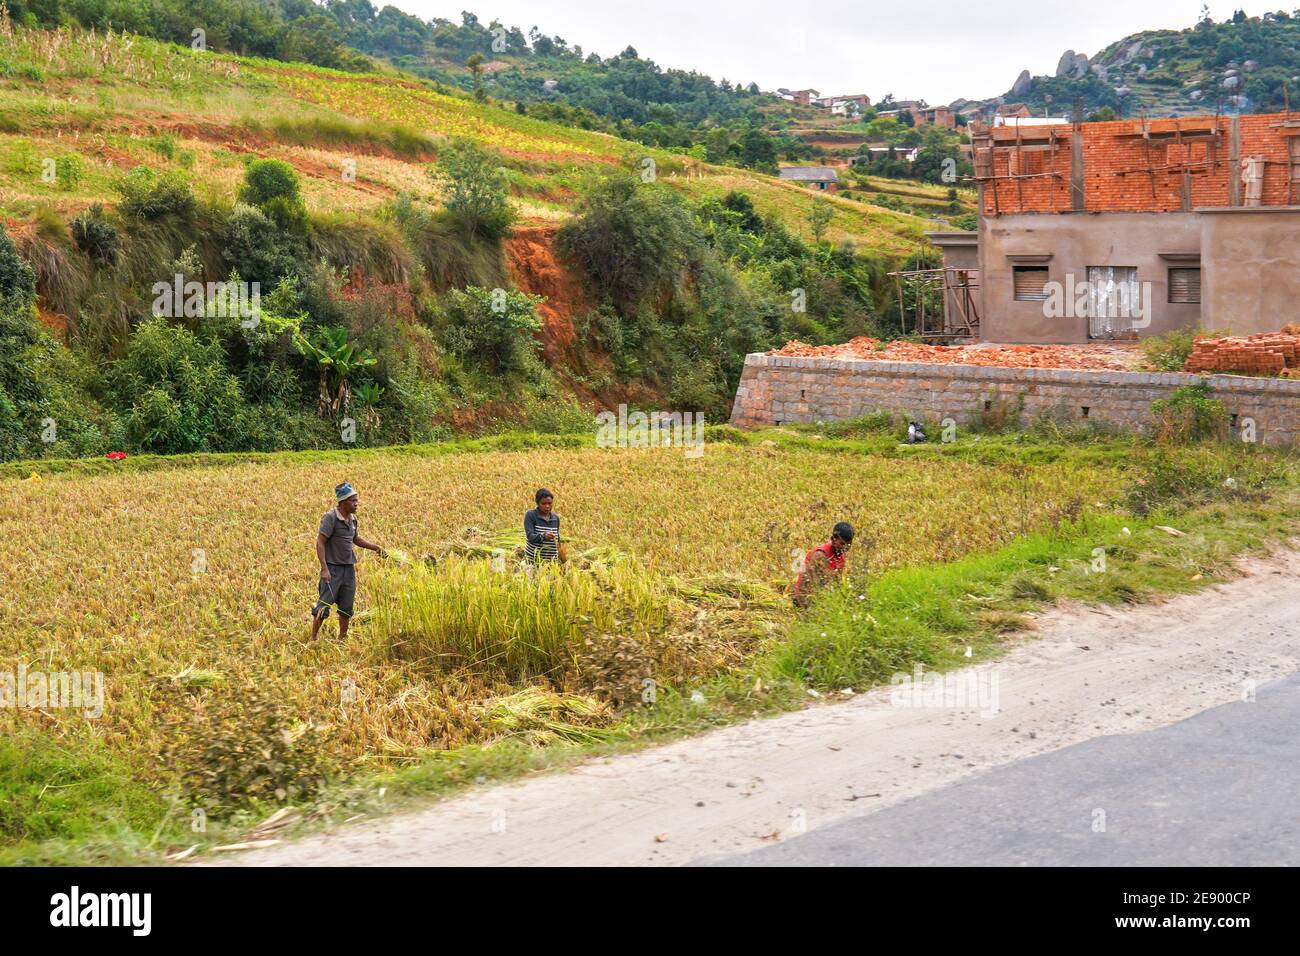 Antananarivo, Madagascar - April 24, 2019: Three unknown Malagasy people working on wet rice field, half built house near them, small hills in backgro Stock Photo